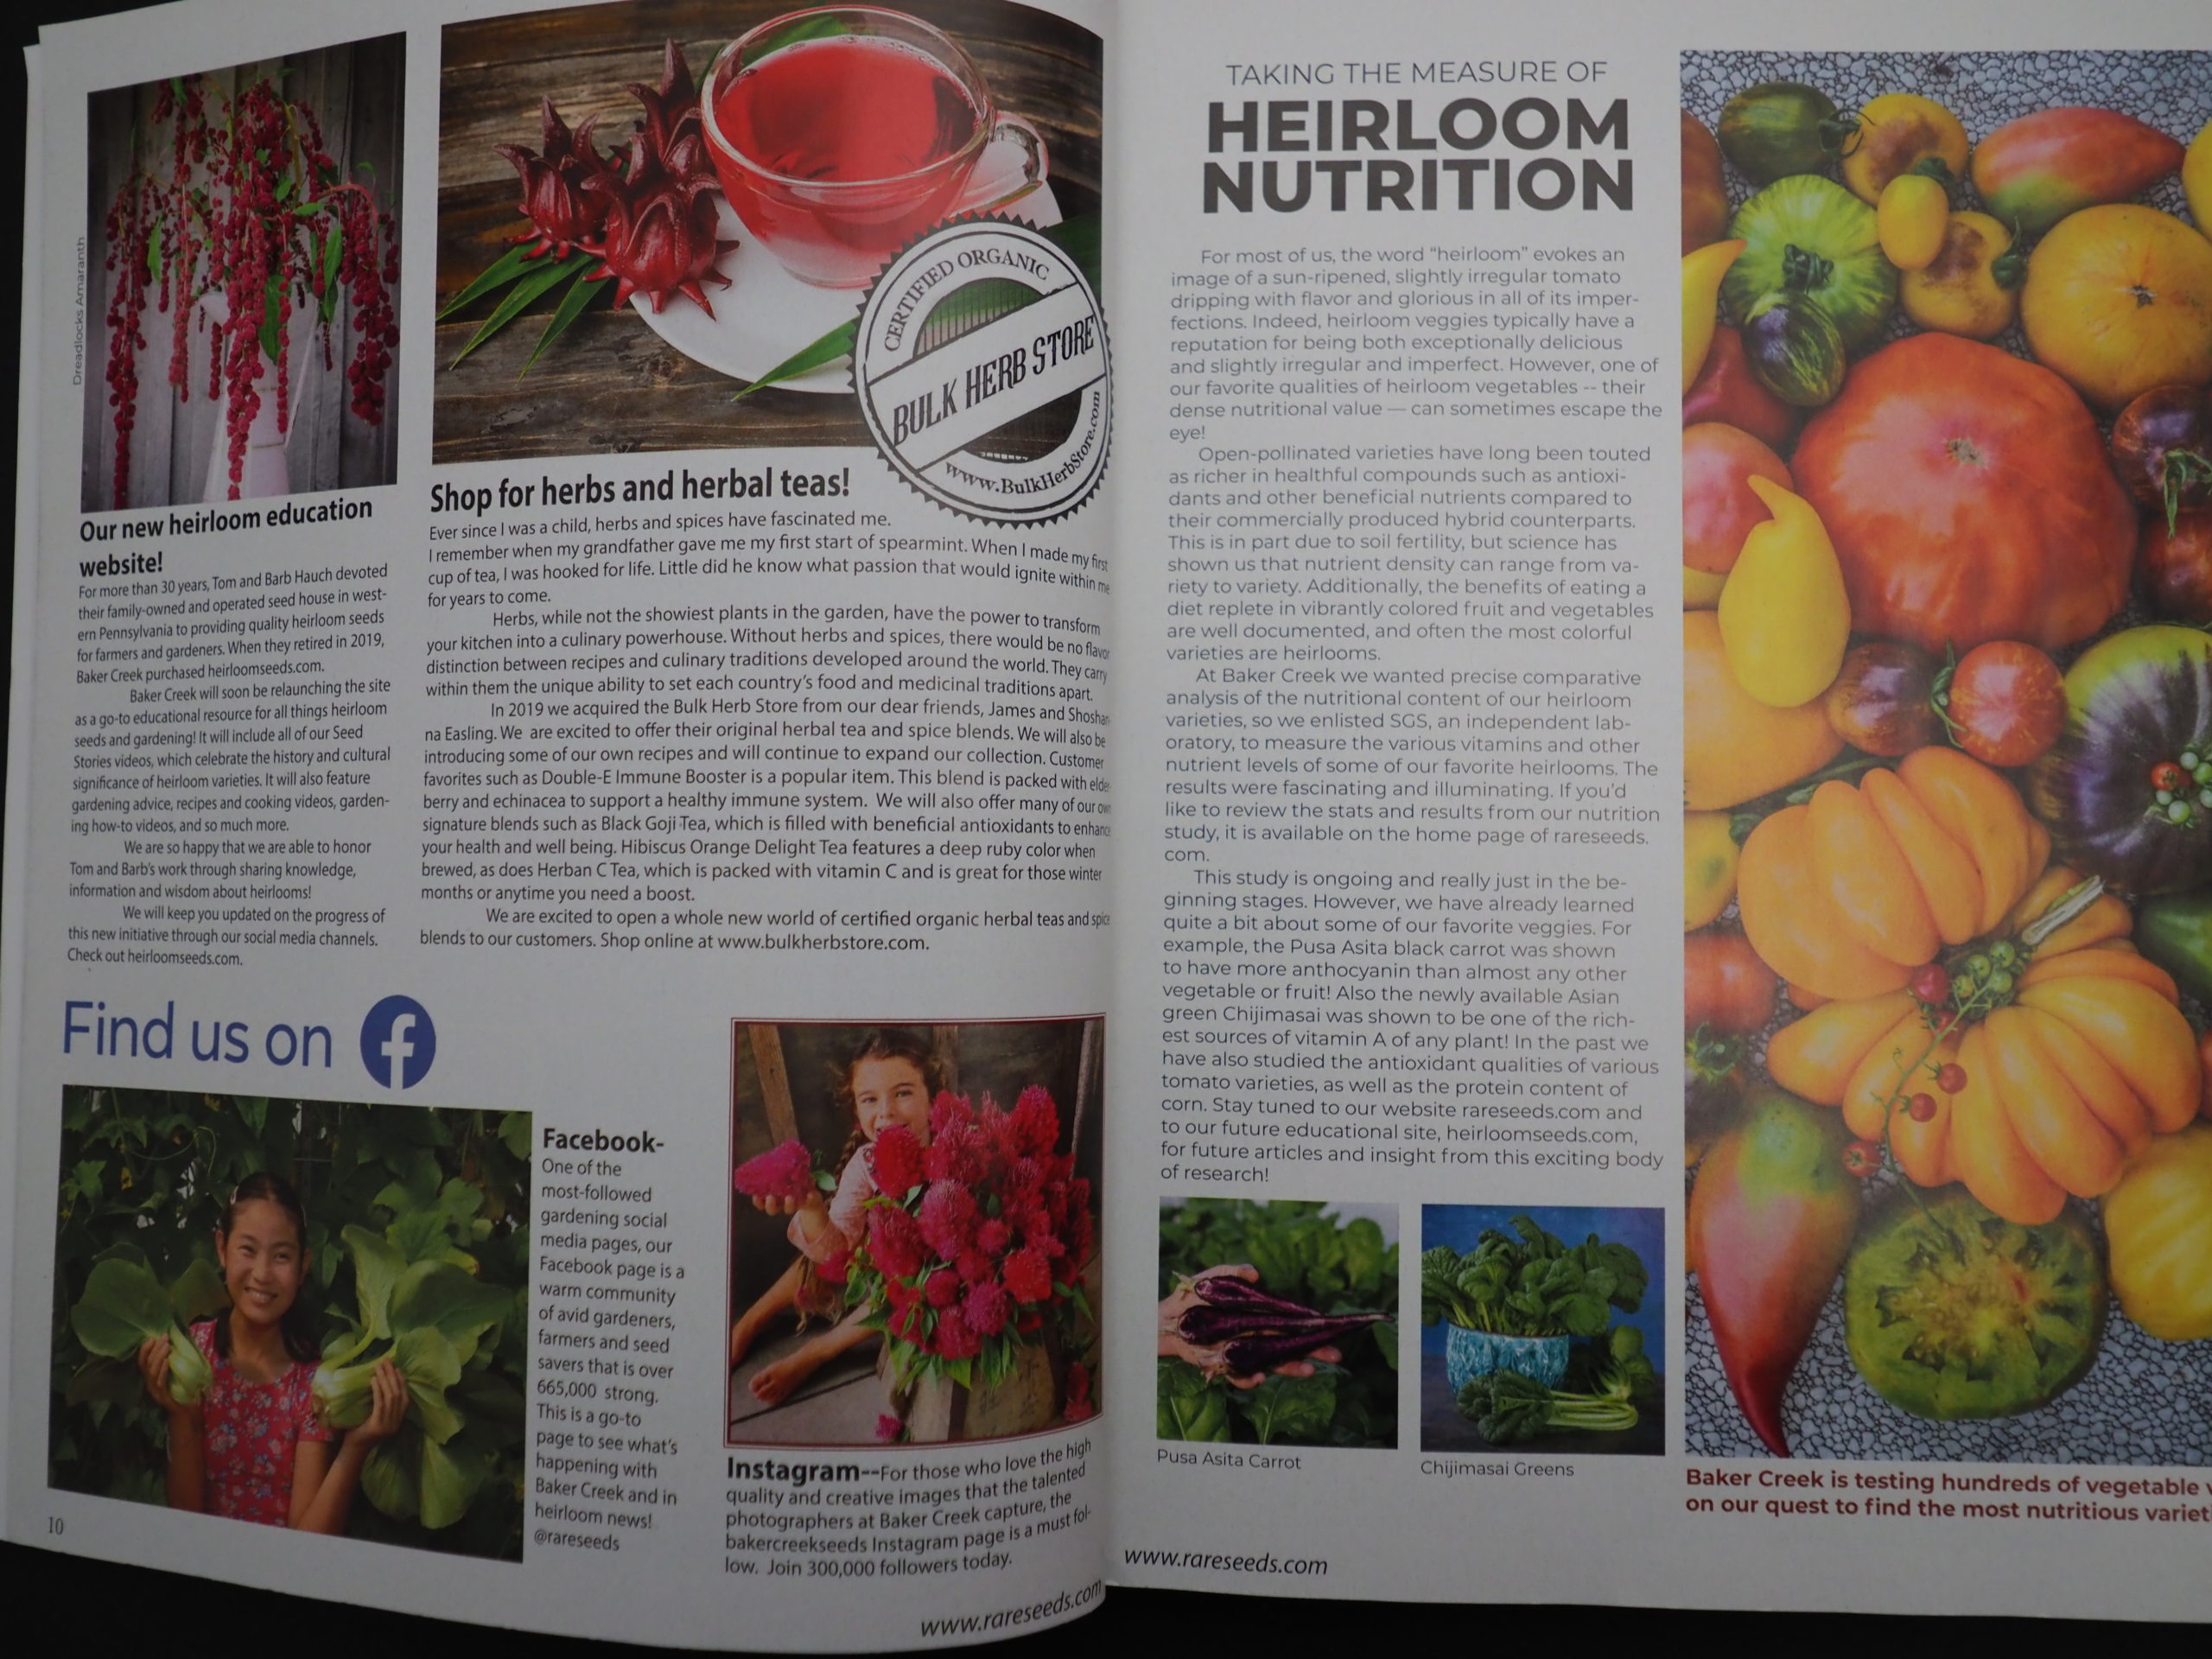 Nearly an inch thick, the 2021 Whole Seed Catalog is a must-have encyclopedia when it comes to heirlooms and open-pollinated seeds as well as pages and pages of growing advice.